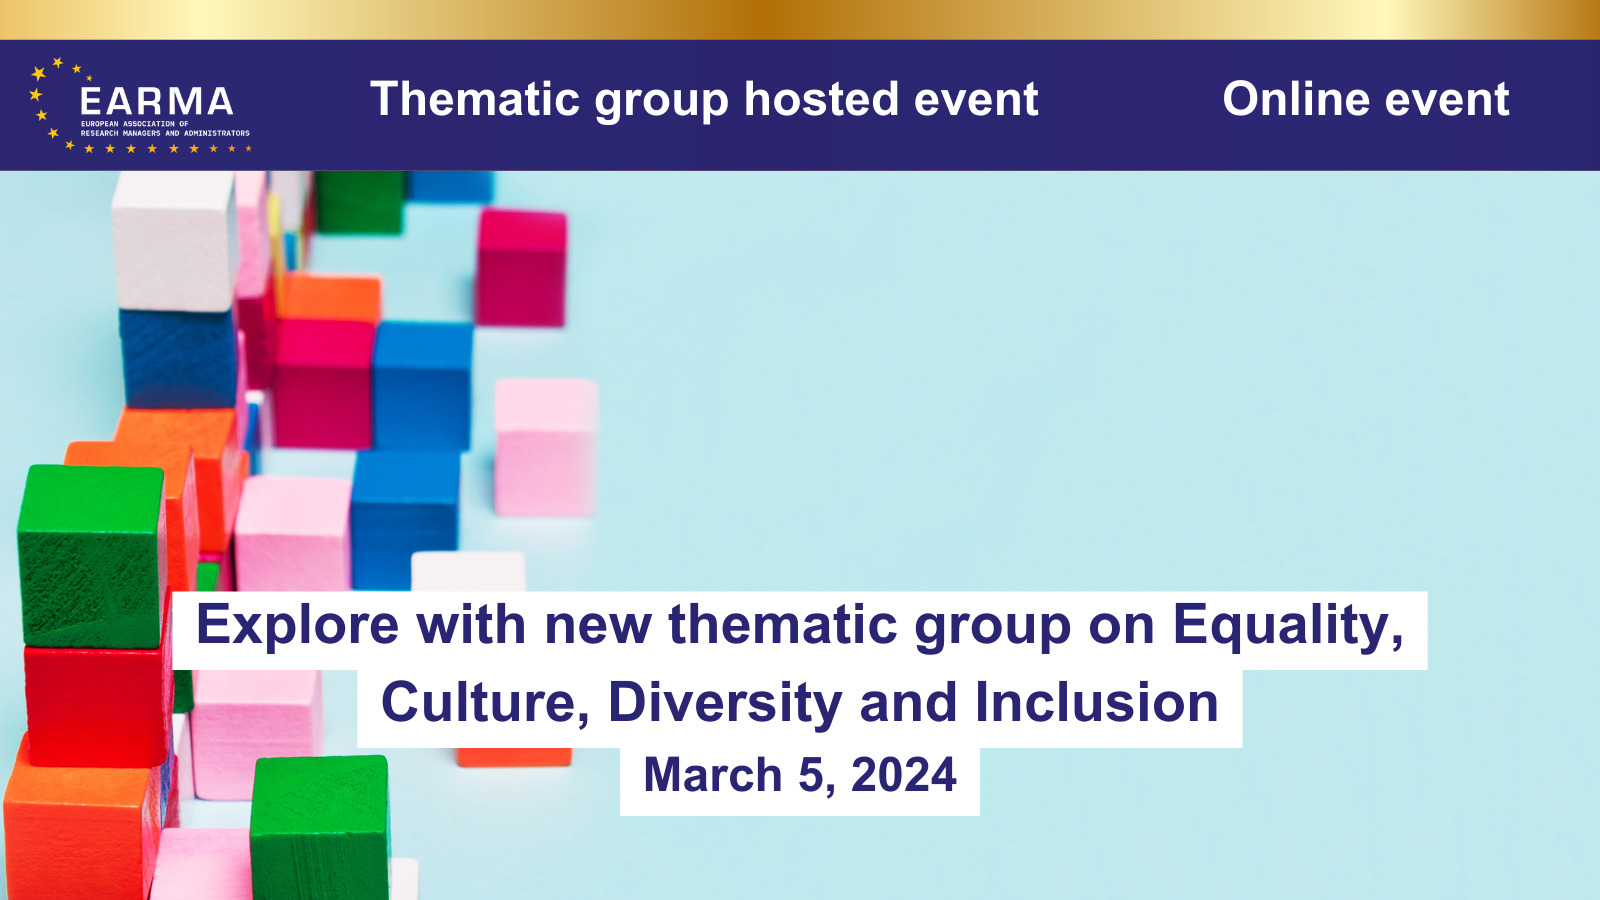 Explore with new thematic group on Equality, Culture, Diversity and Inclusion